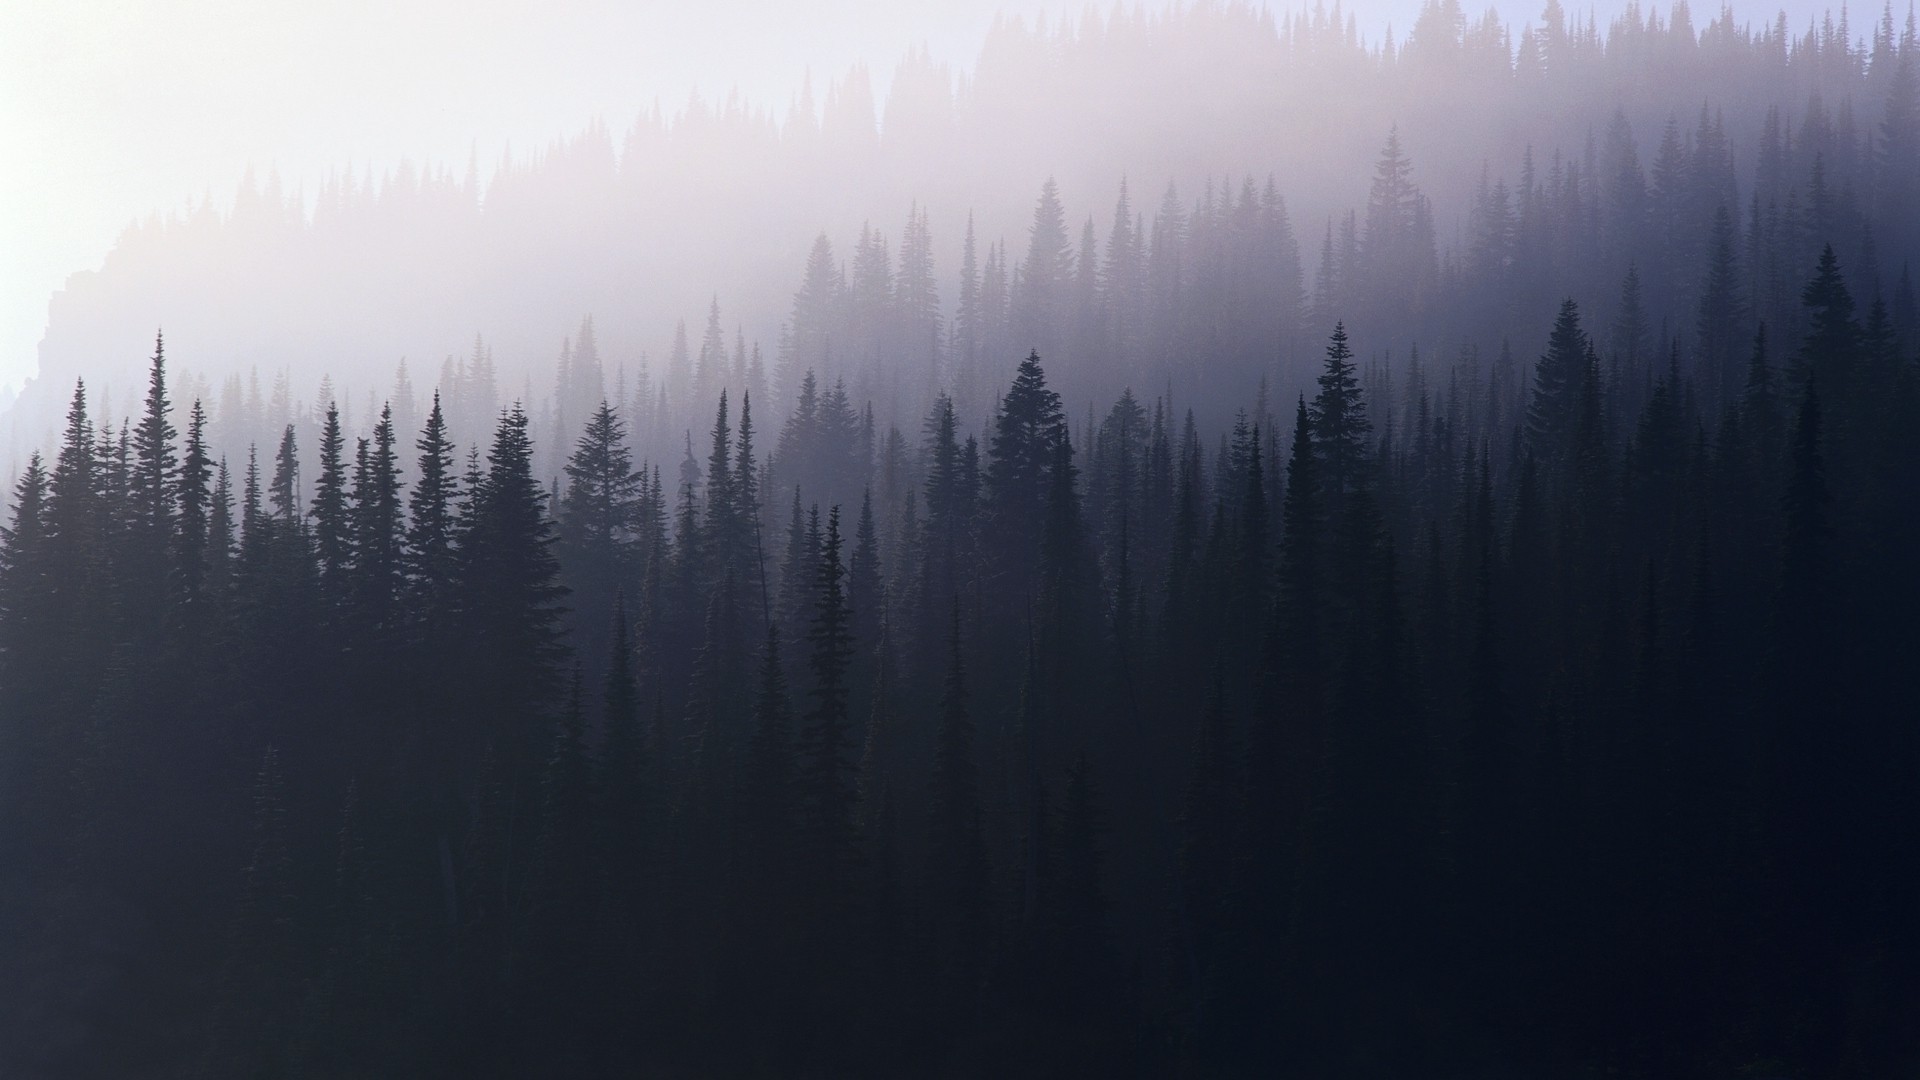 General 1920x1080 trees forest pine trees nature violet mist